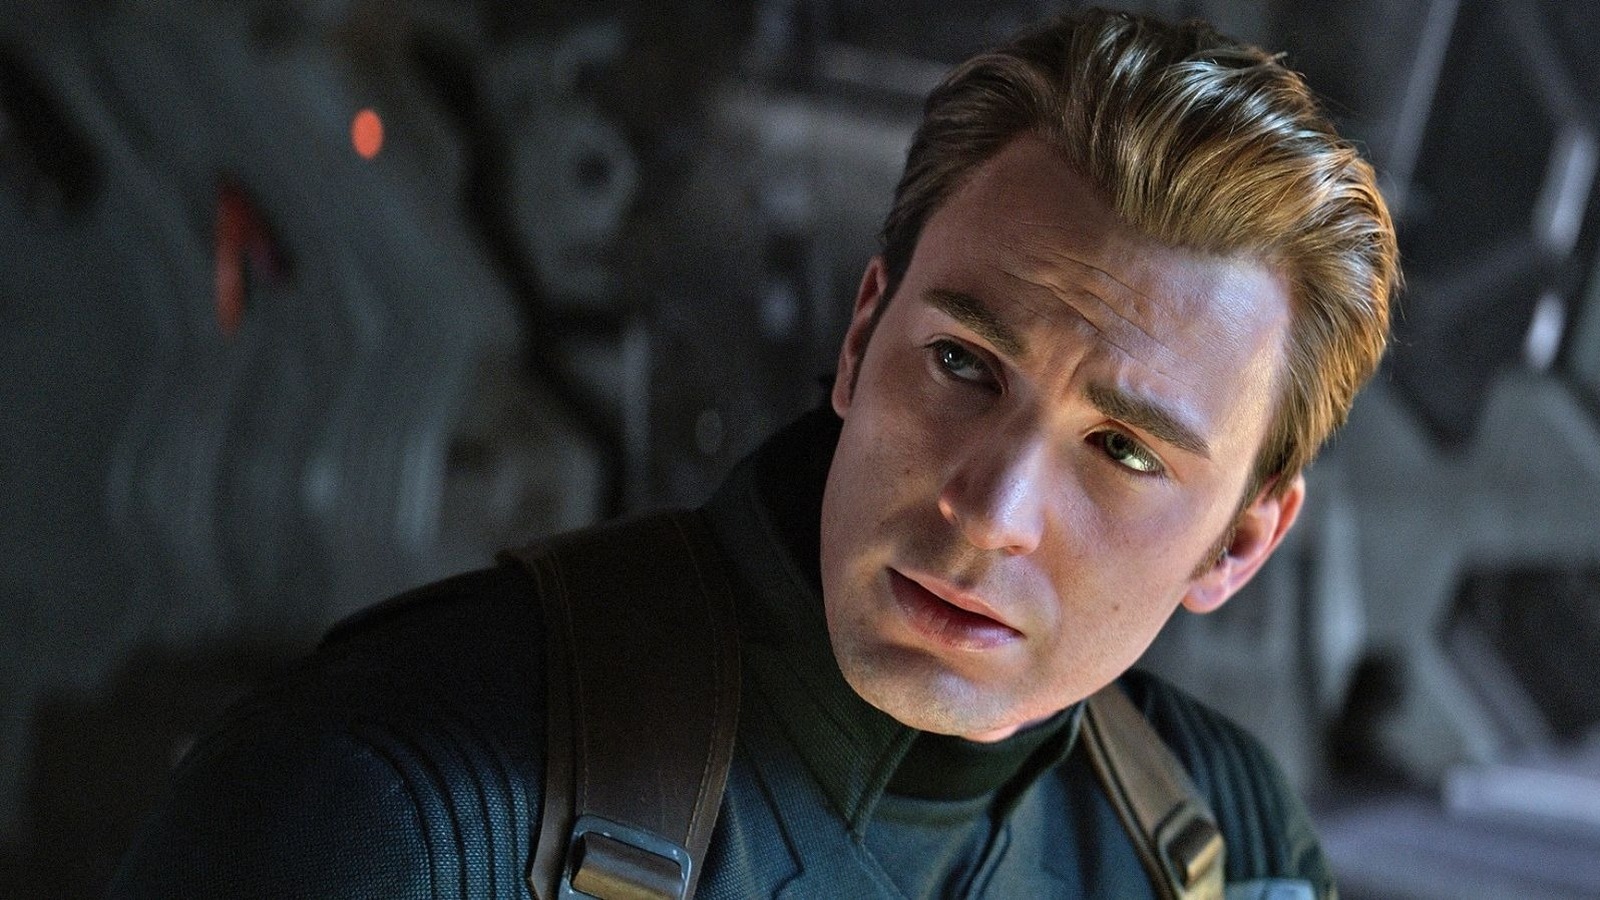  Chris Evans Originally Didn't Want A Role In The MCU